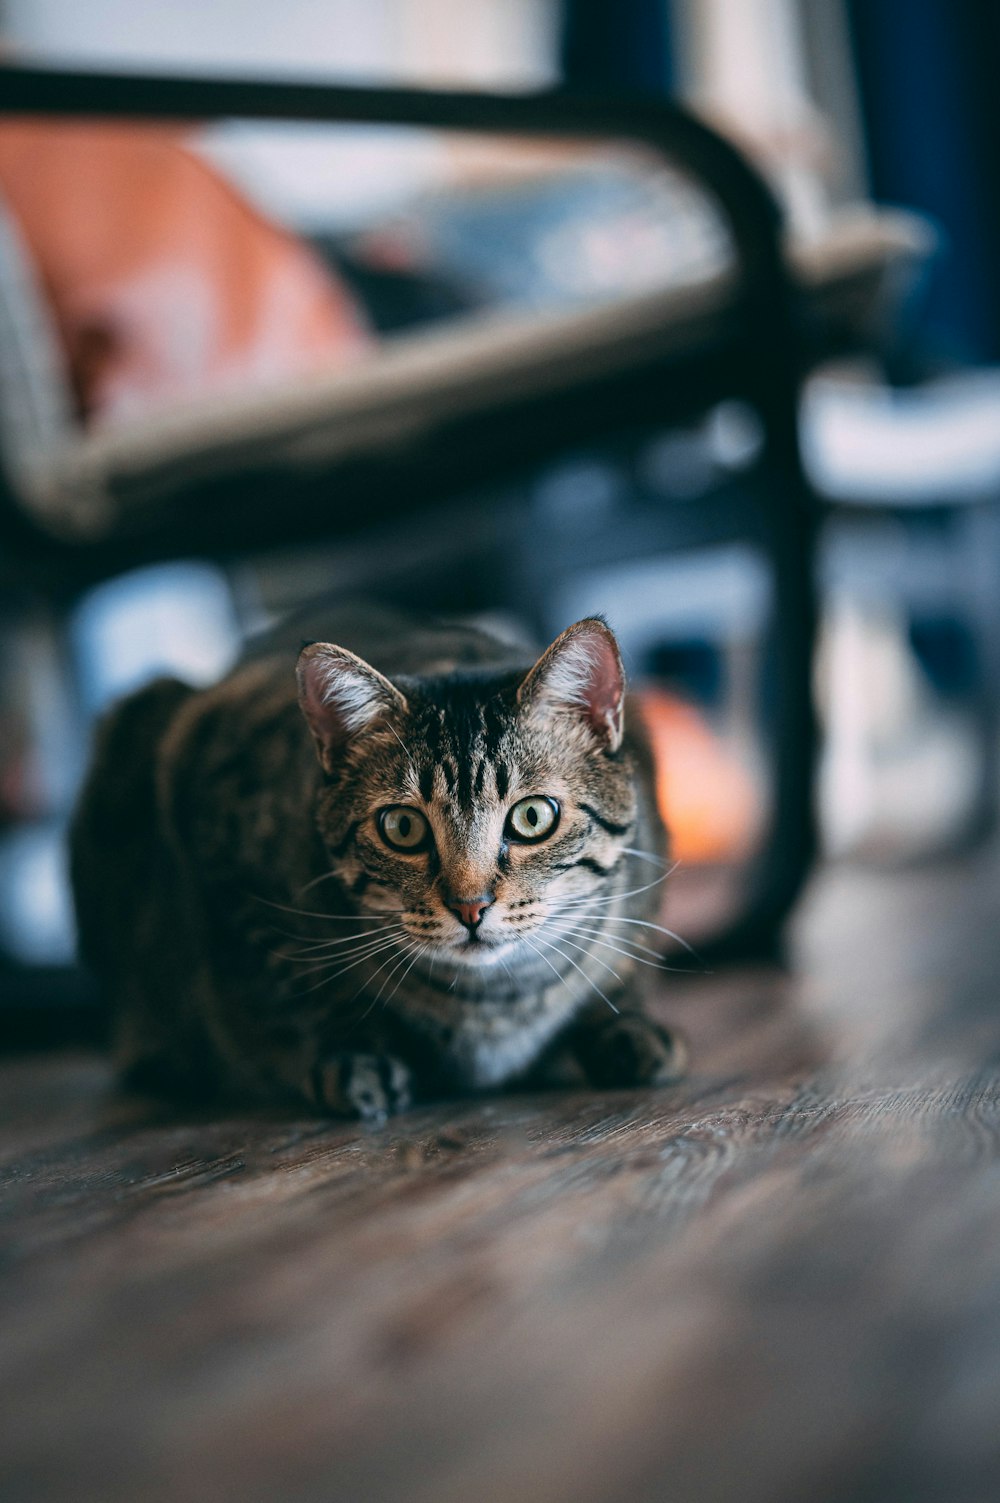 a cat sitting on a wooden floor next to a chair